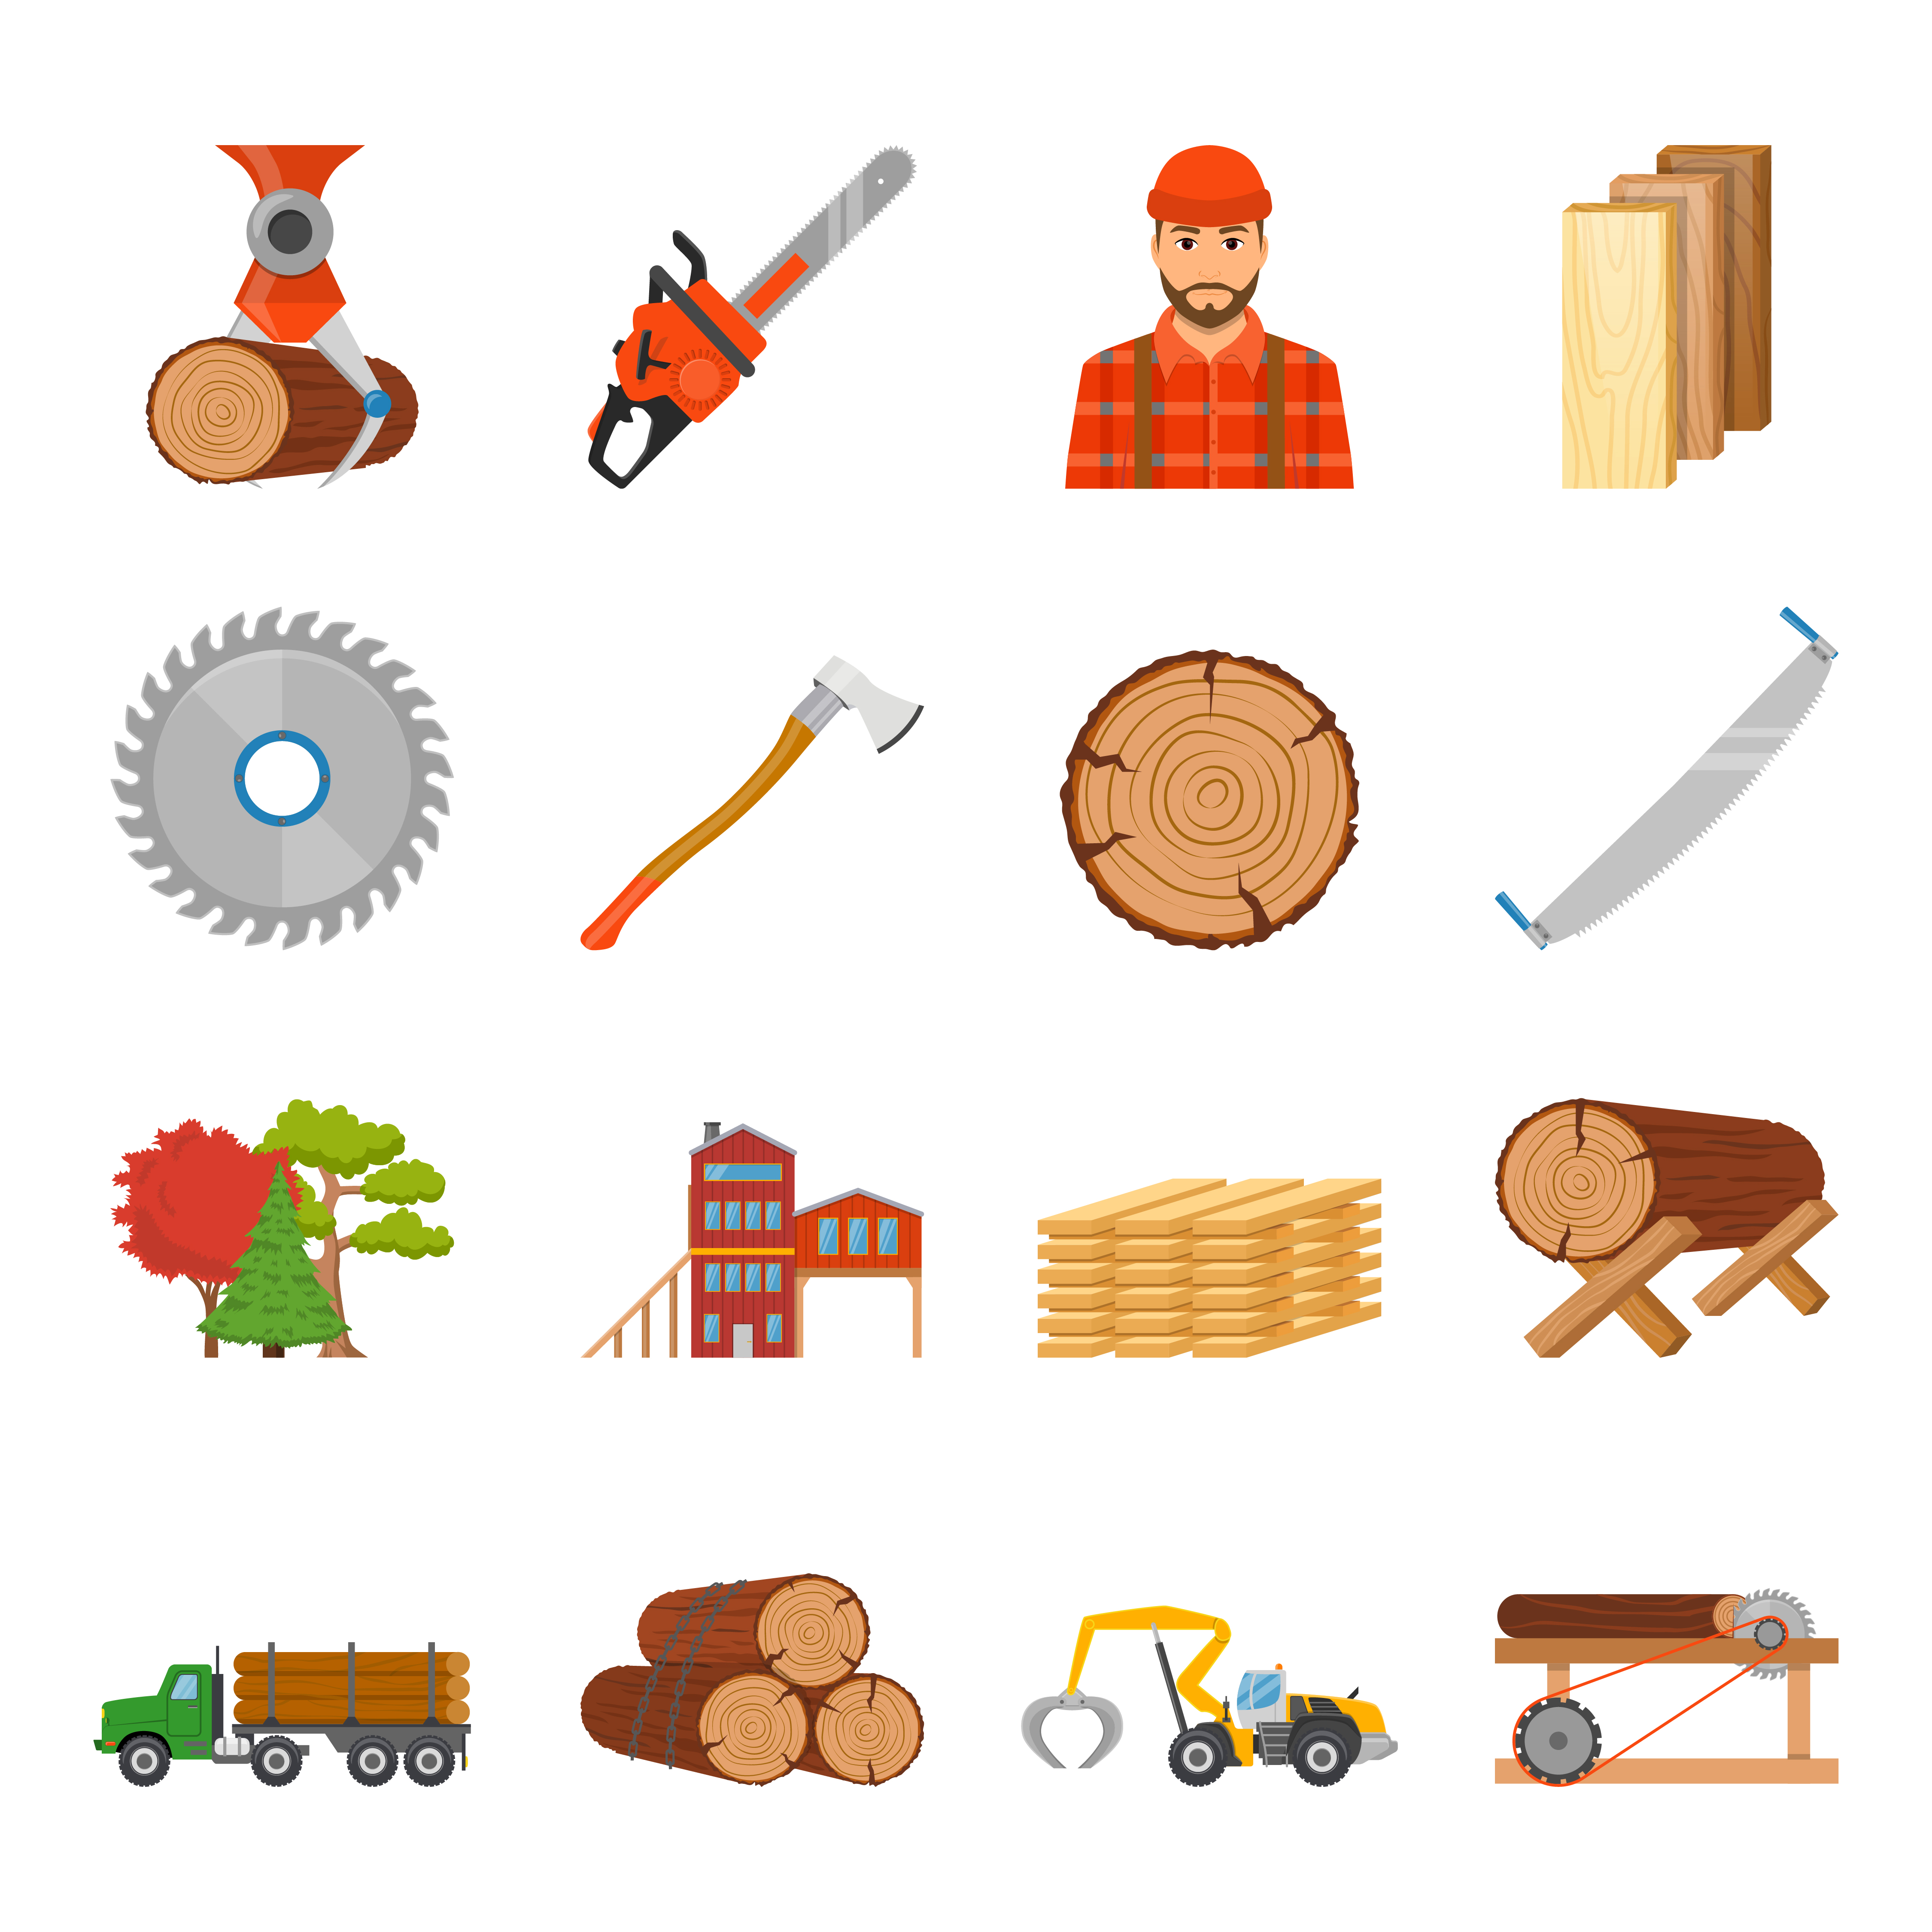 Download Sawmill Timber Icon Set - Download Free Vectors, Clipart ...